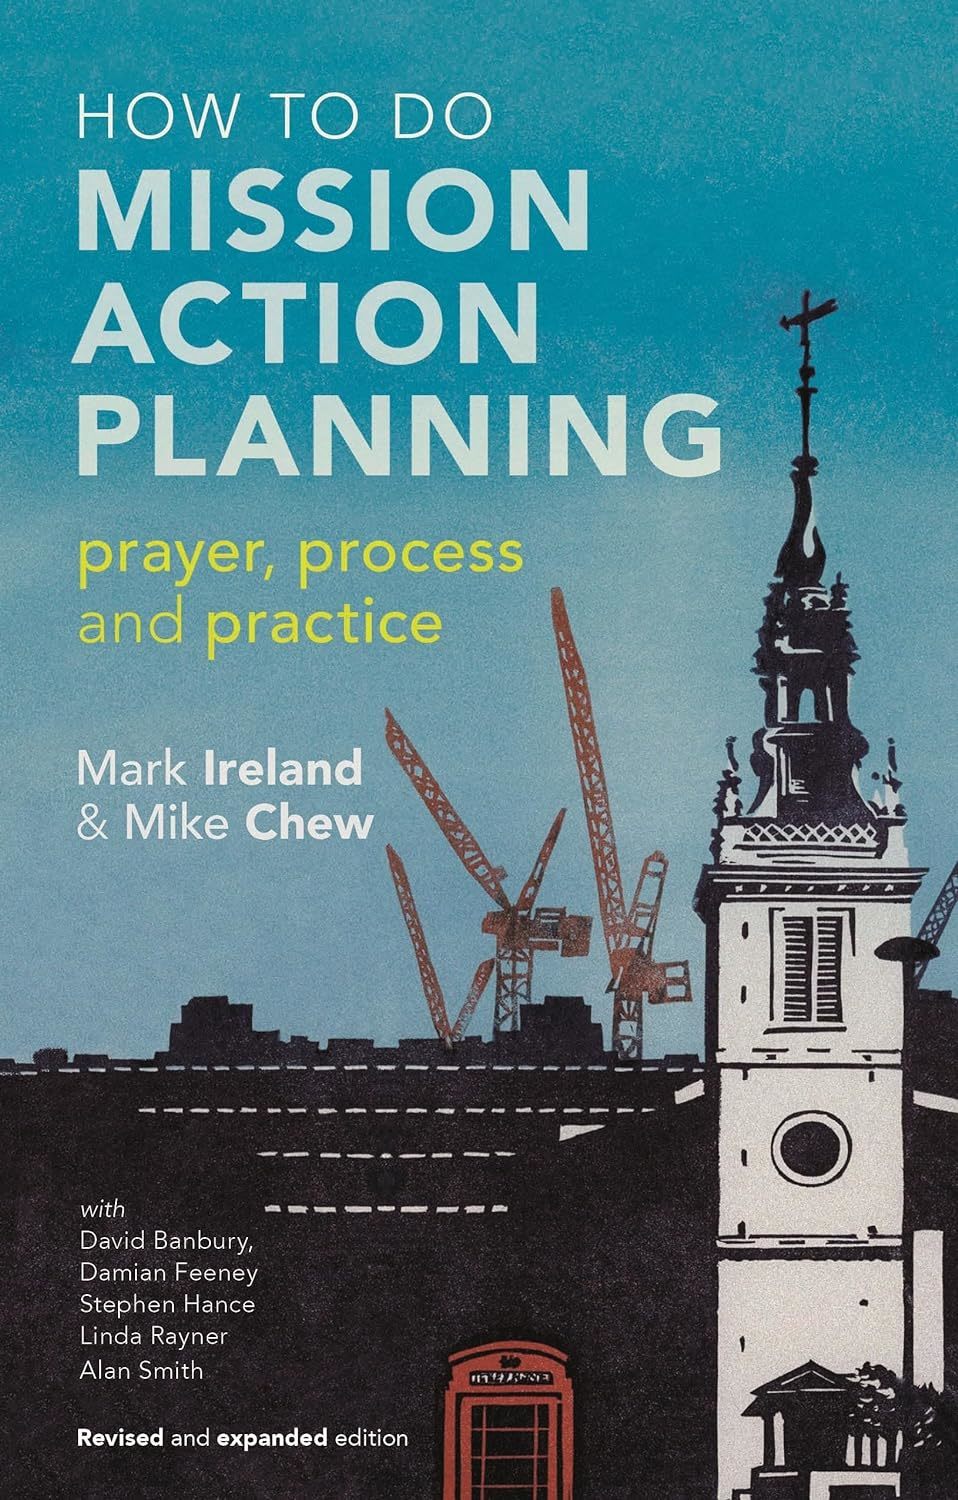 How to do Mission Action Planning book cover